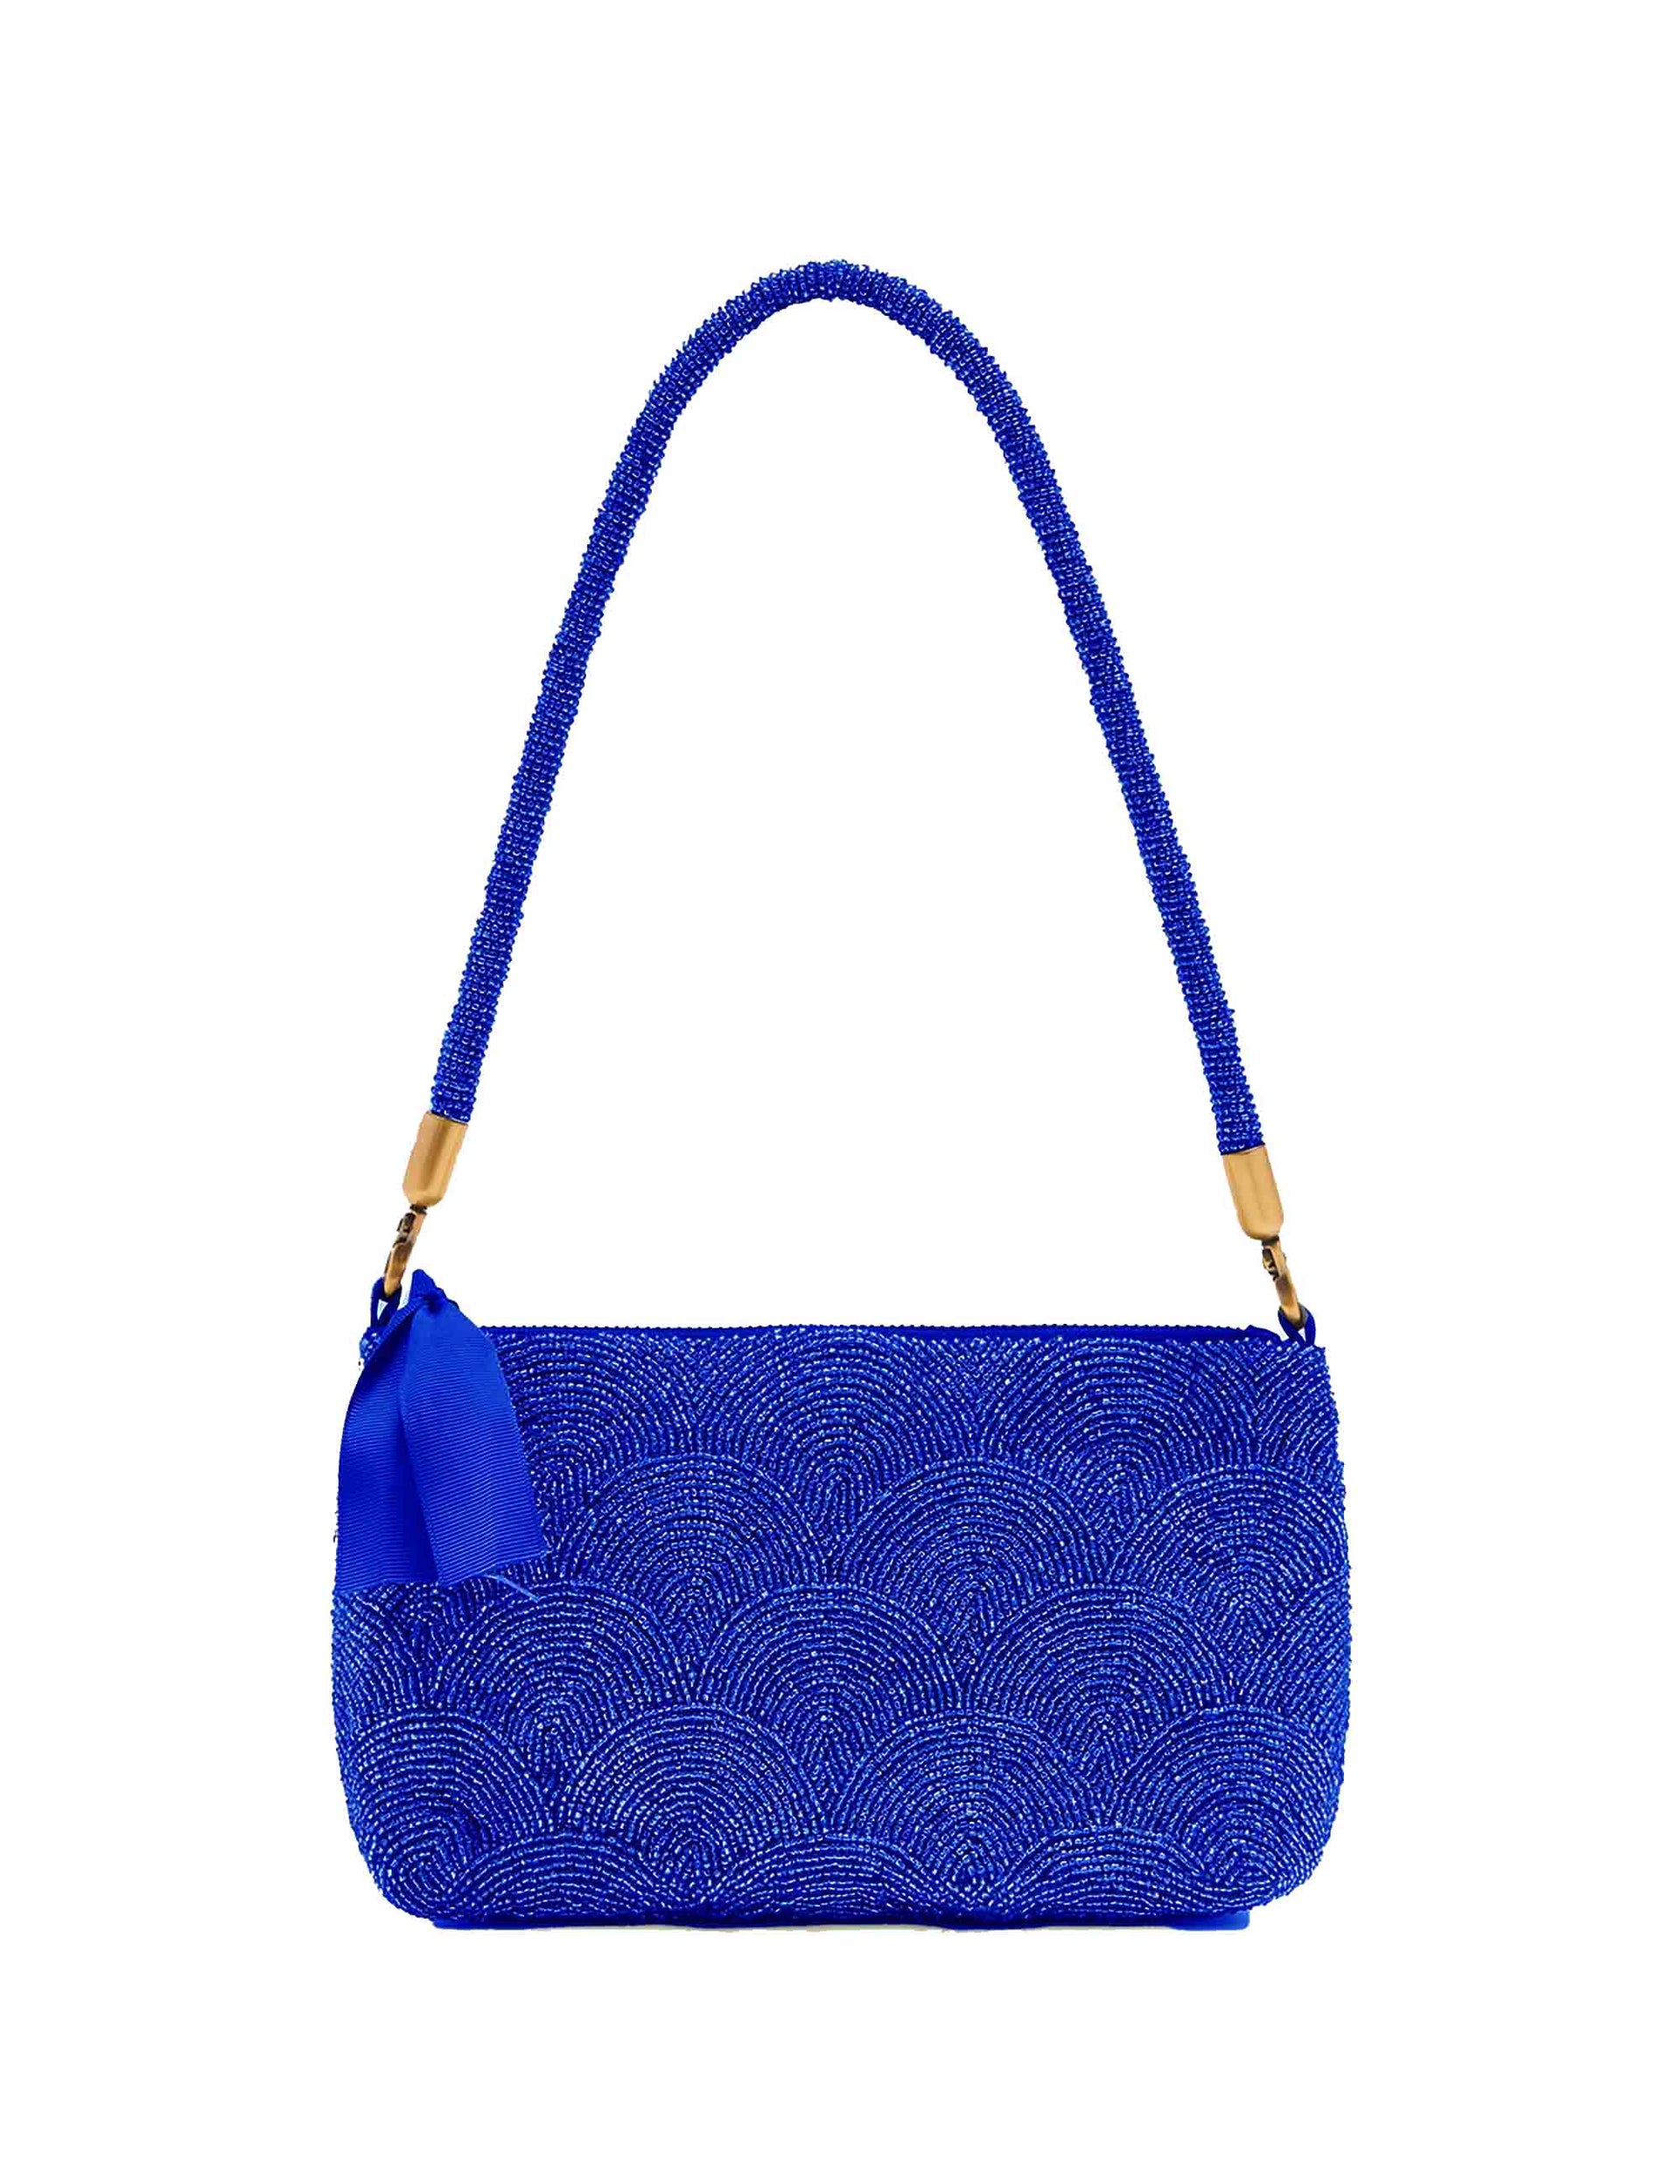 Circles women's shoulder bags in fine blue with beads